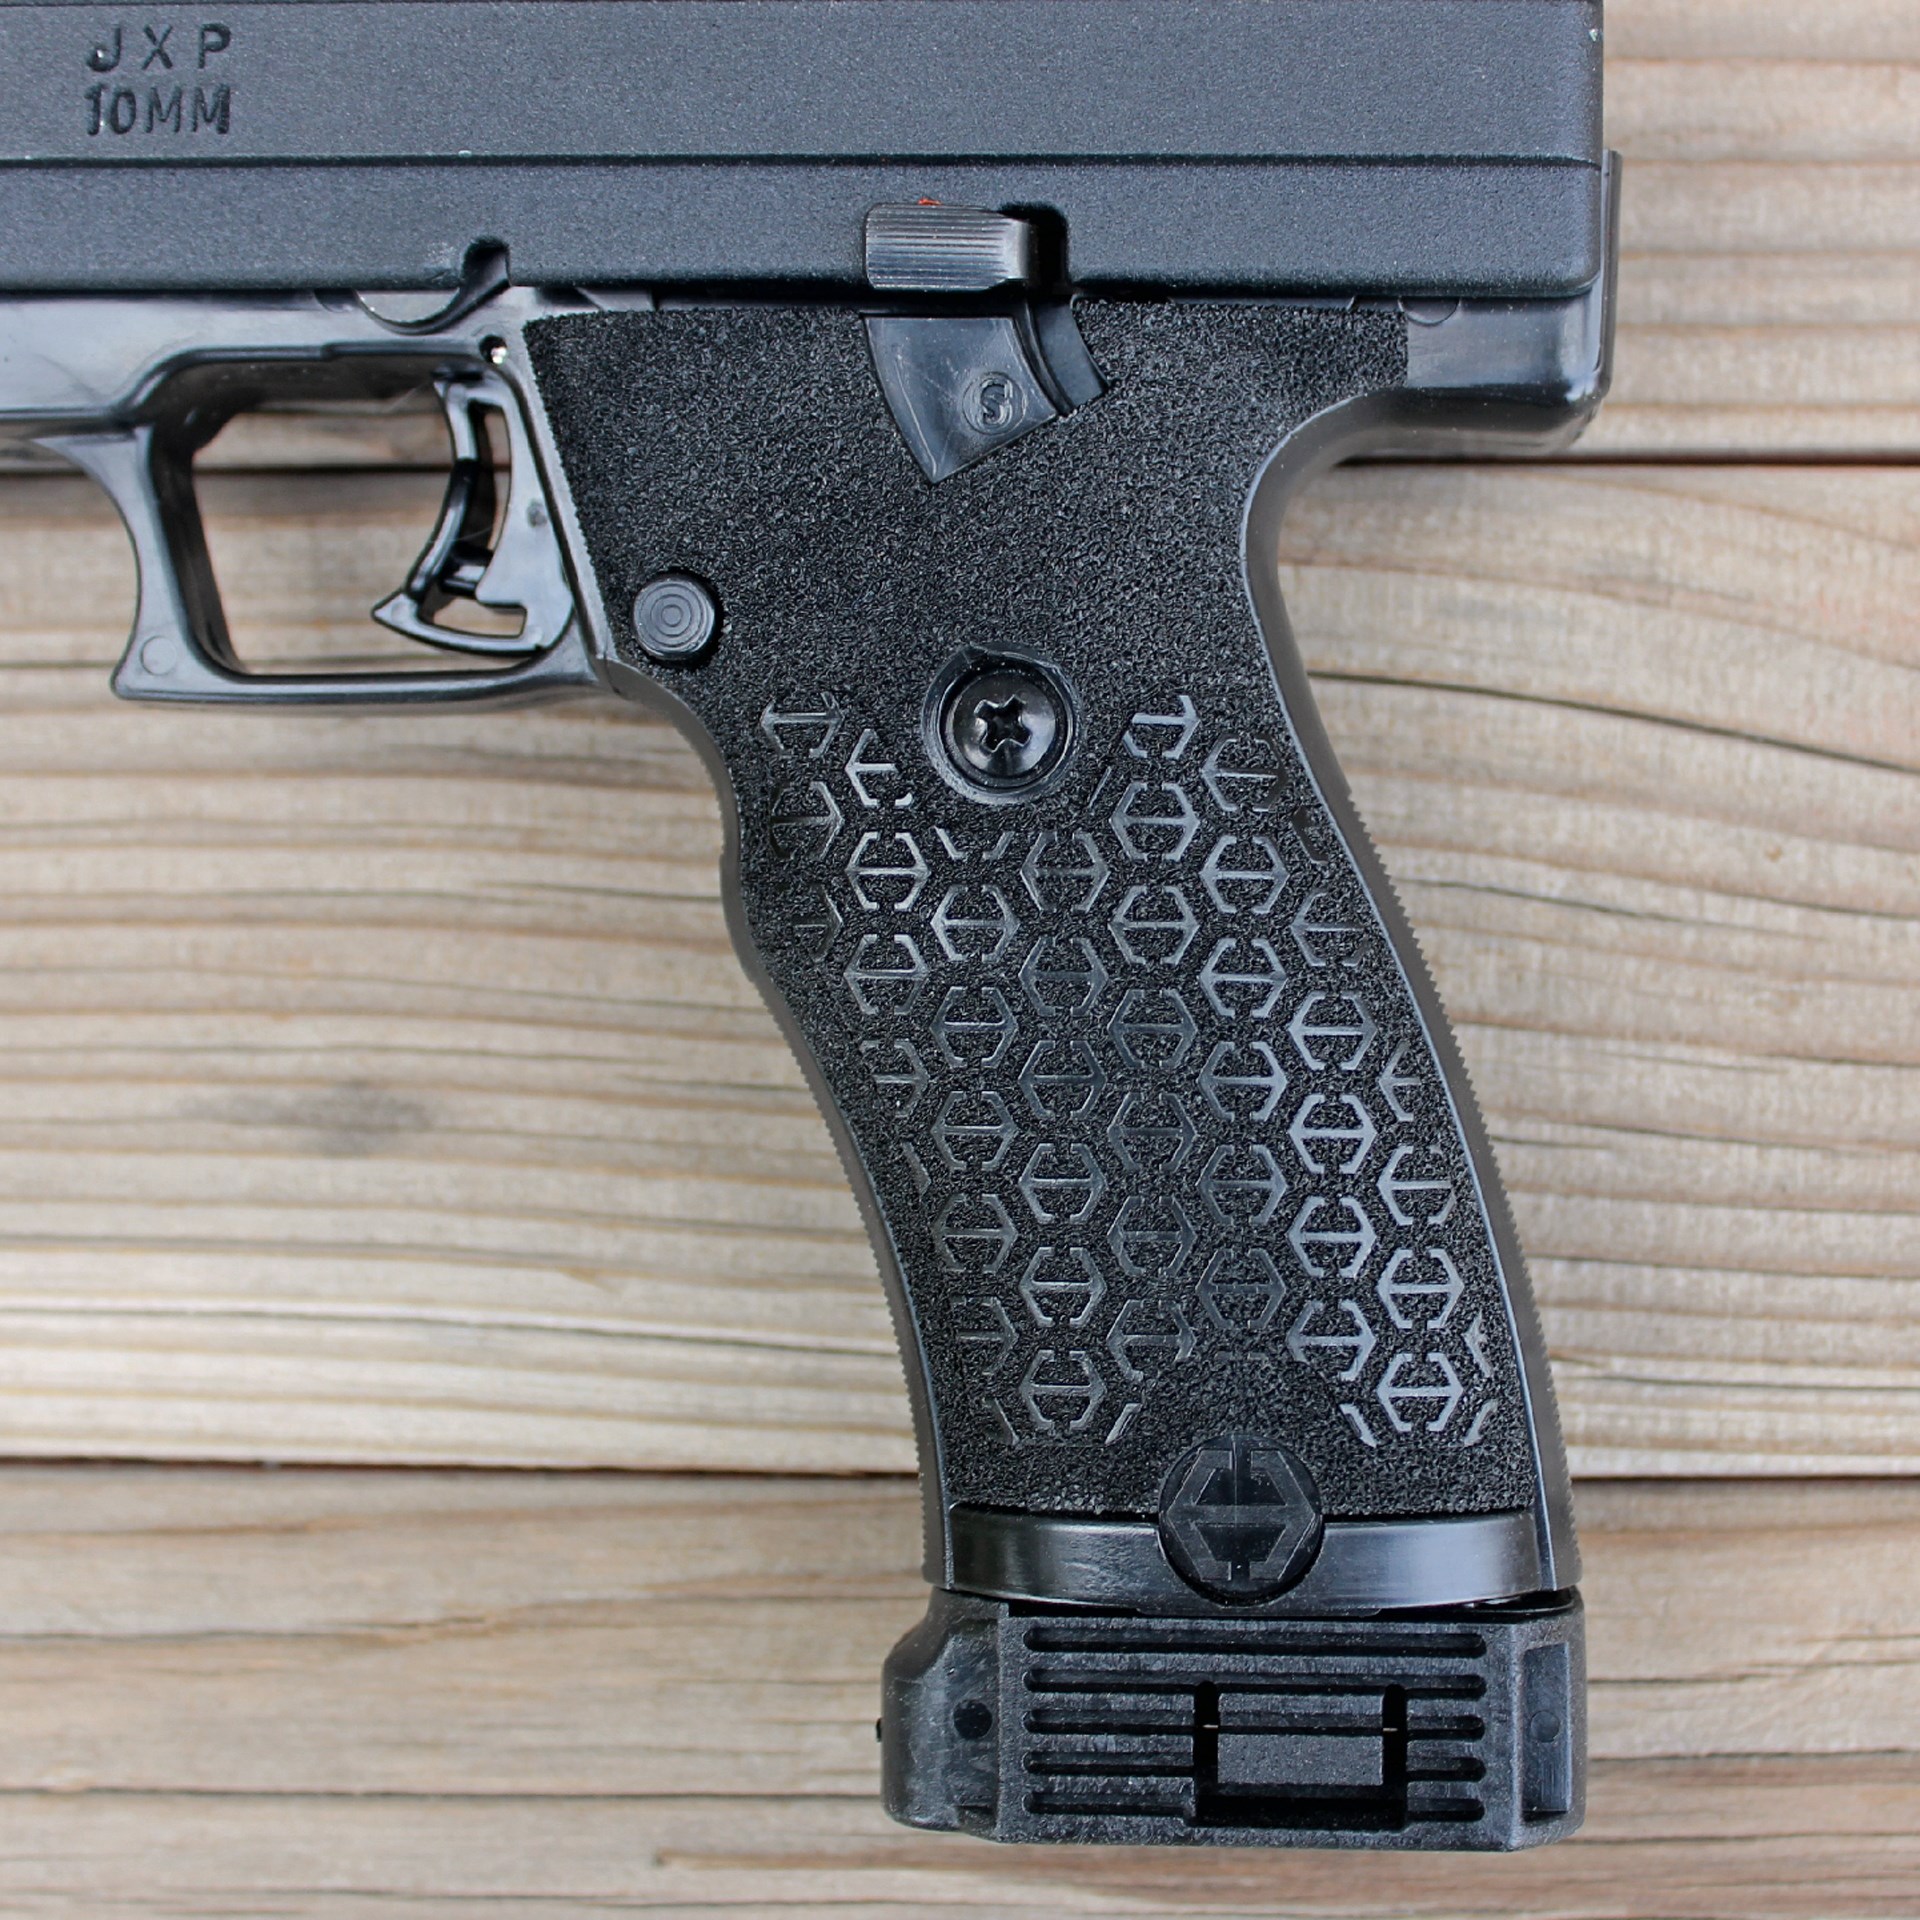 cropped image of JXP 10 pistol semi-automatic gun closeup view grip texturing stipling polymer black shown on wood boards